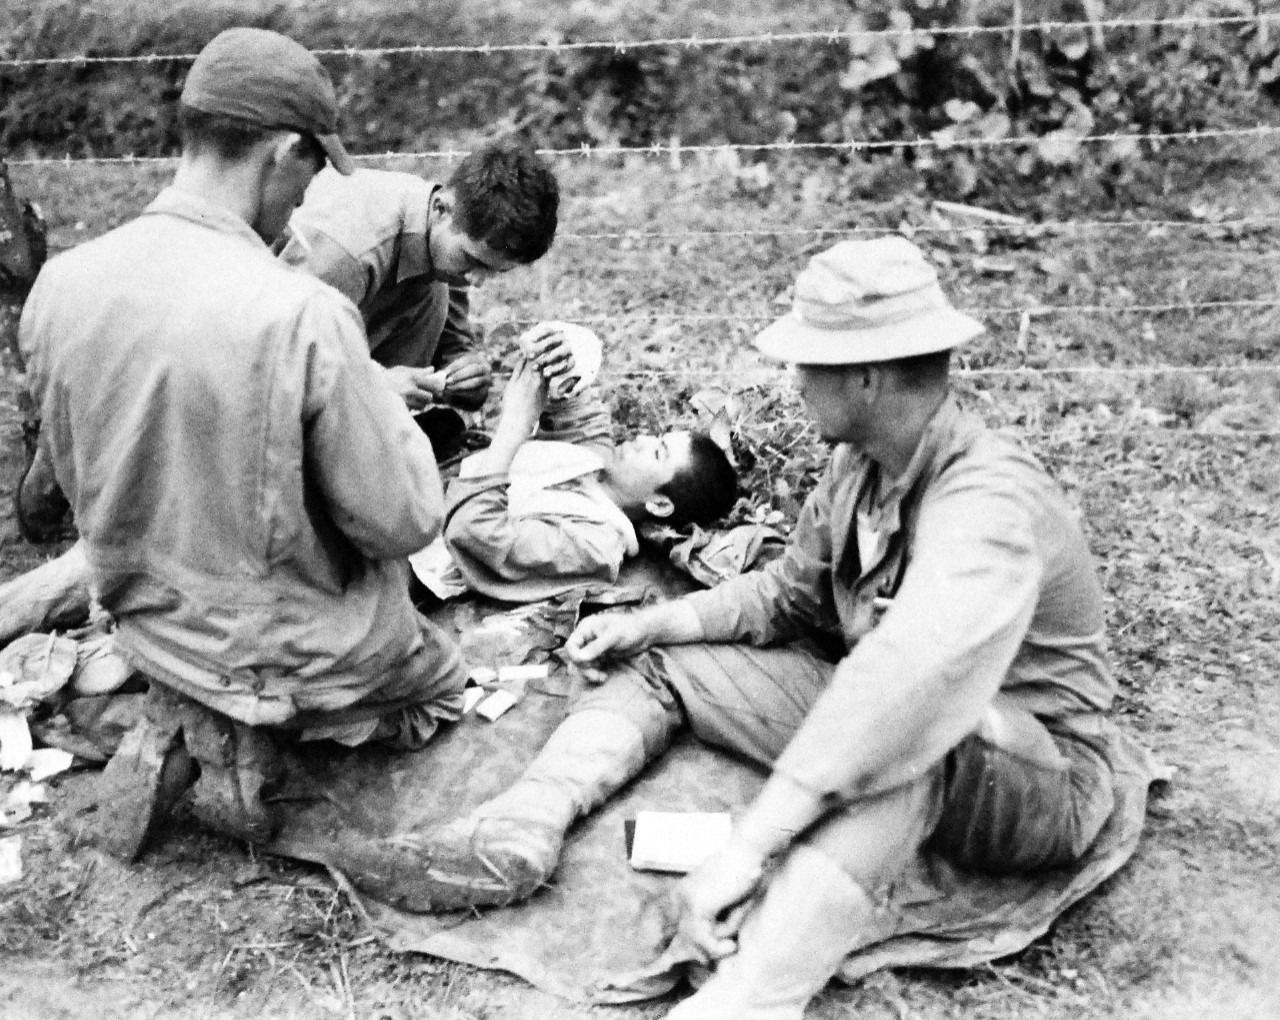 127-GW-666-119801:  Okinawa Campaign, April-June 1945.   Japanese prisoner given first aid.  Shown (left to right):  PHM1/C F.M Dish, USN, Japanese prisoner, Corporal, John S. Rachuneh and center back to camera, Lieutenant J.H. Murphy, MC, USN.     Photographed by Goldberg, April 8, 1945.   Official U.S. Marine Photograph, now in the collection of the National Archives.  (2014/7/23). 